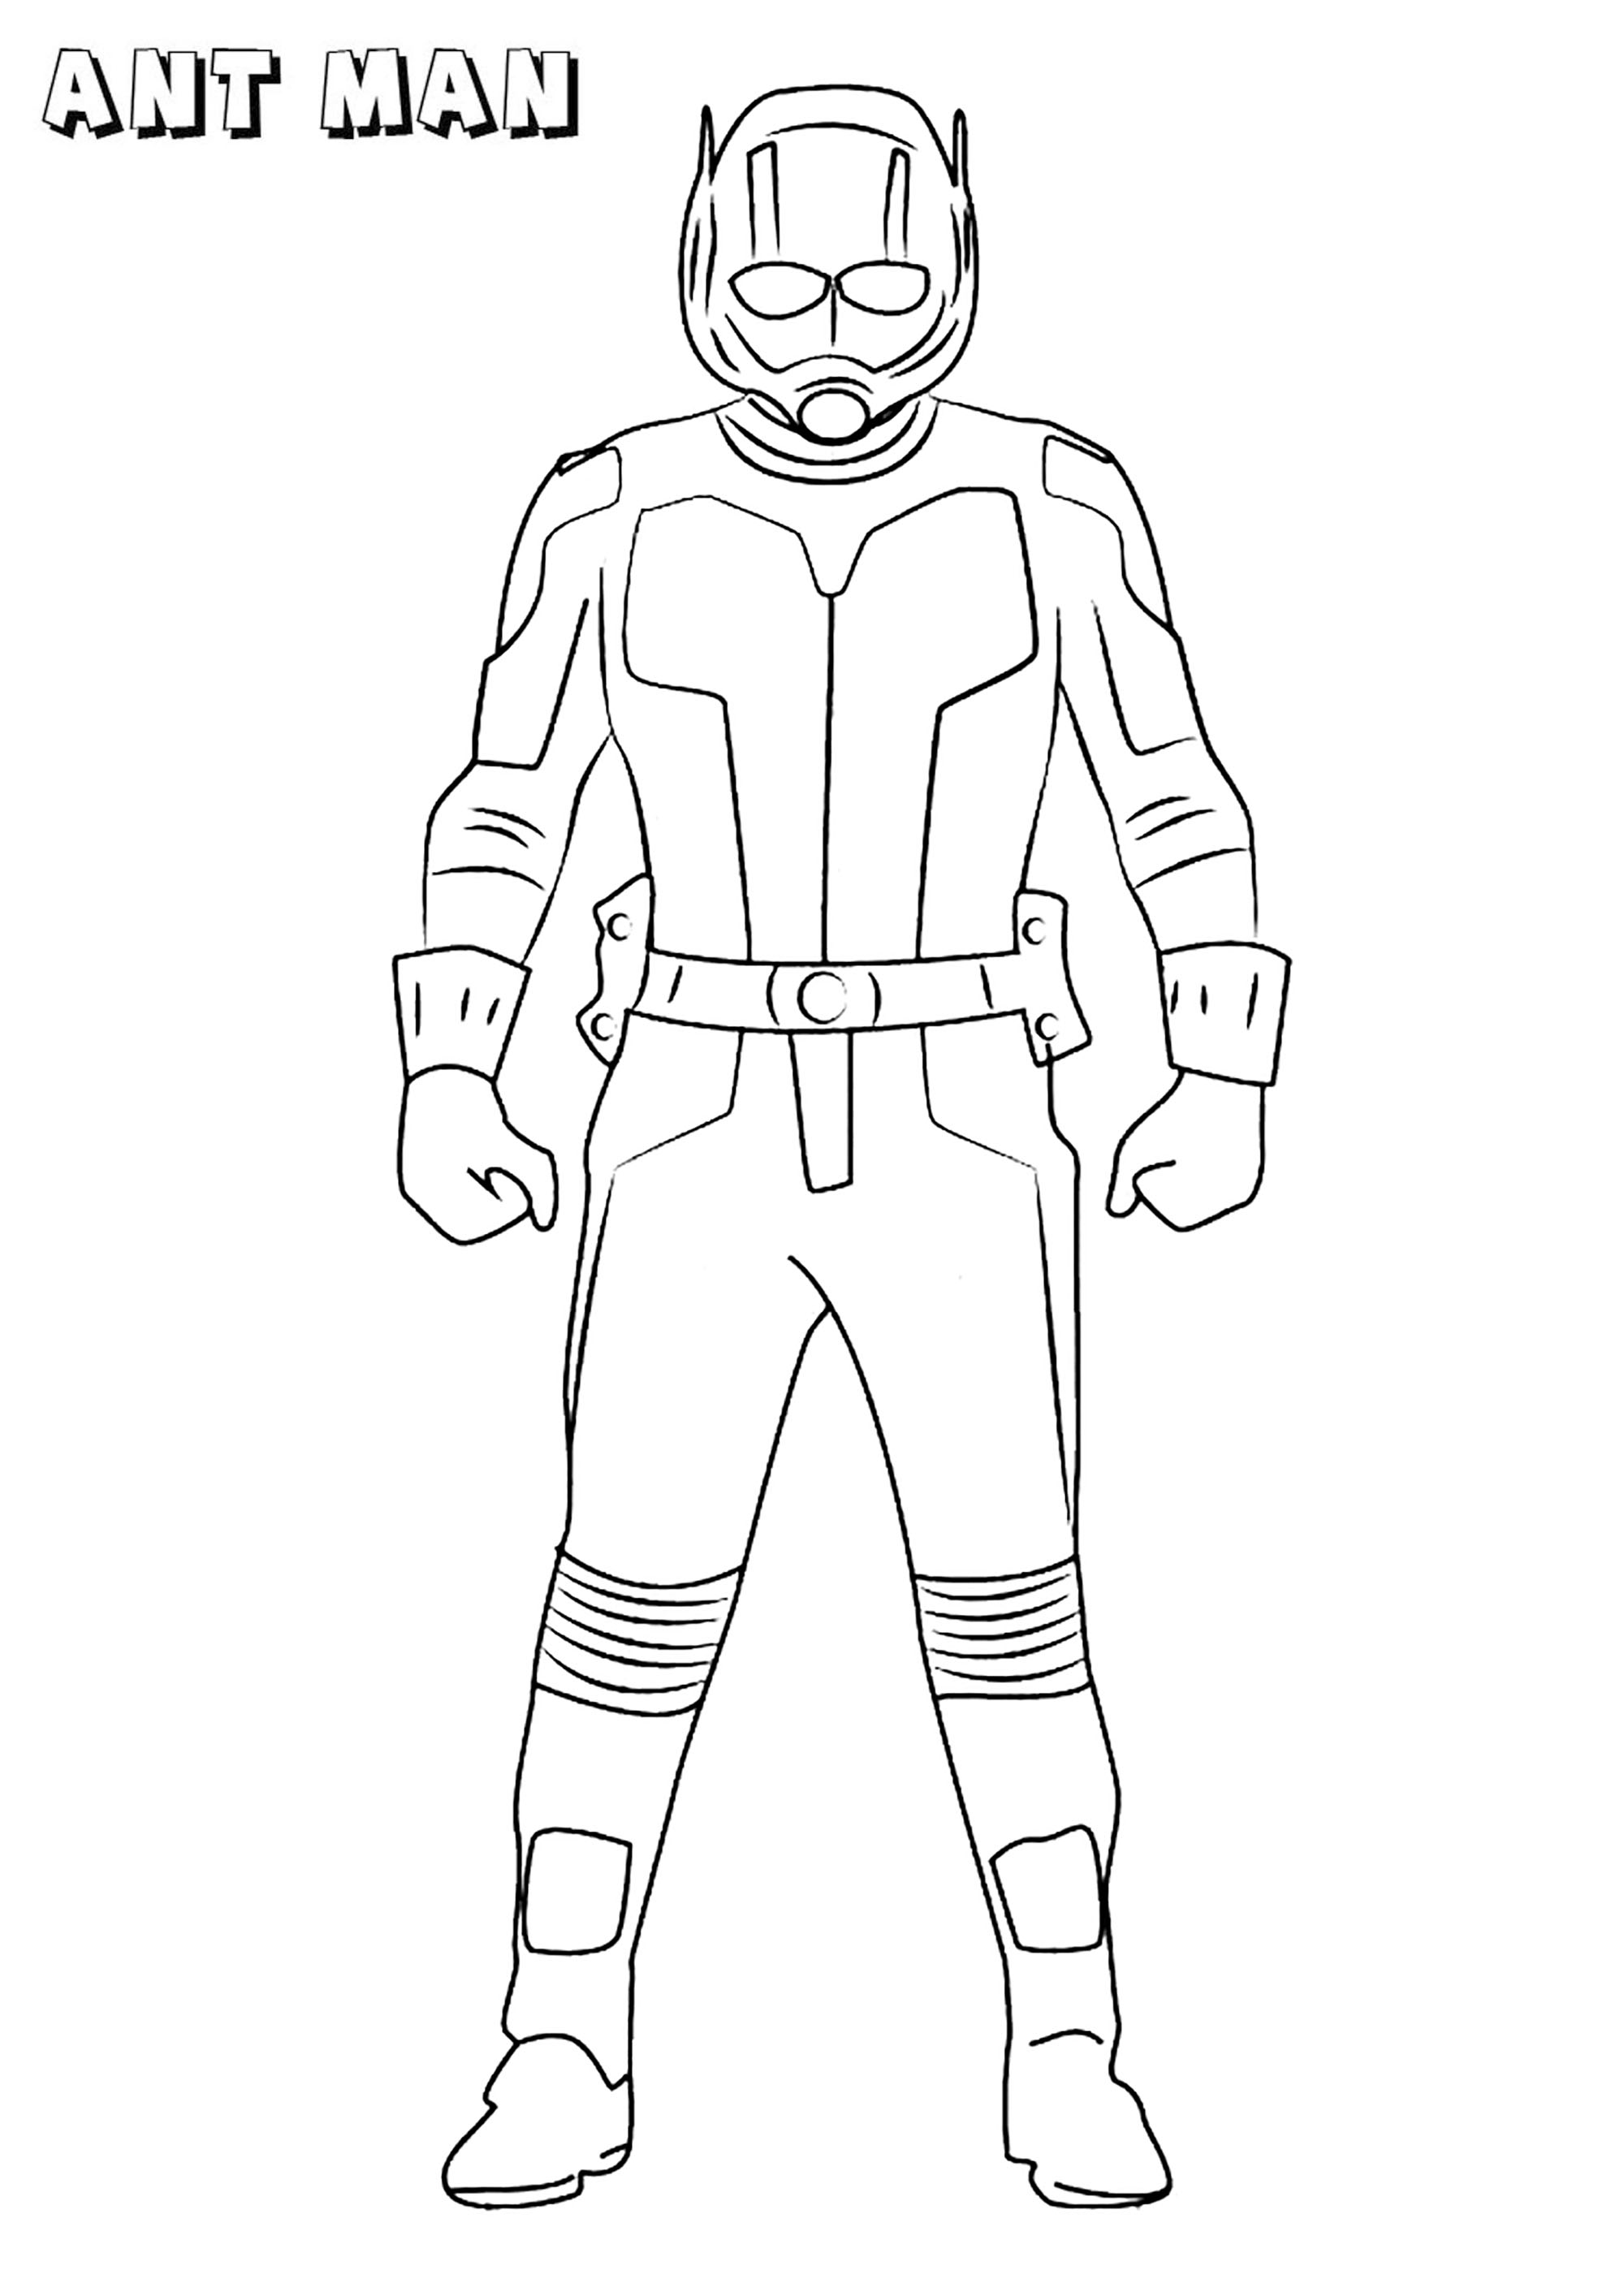 Ant Man Coloring Pages   Coloring Home